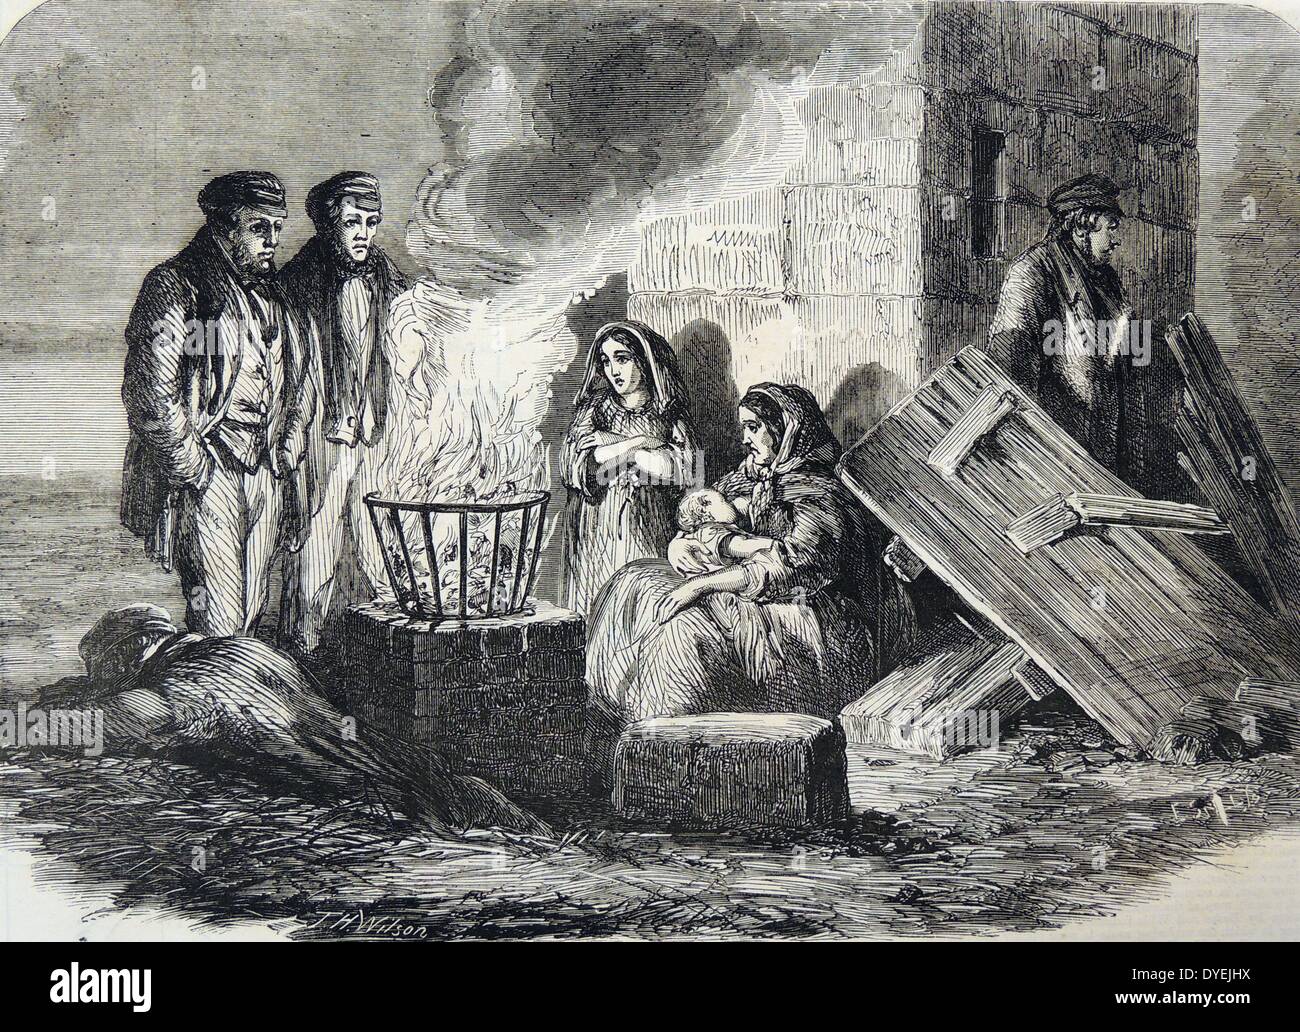 Hartley Colliery Pit Disaster, Northumberland, 16 January 1862.  Friends and families waiting at the pit head for news. Engraving, London, 1862. Stock Photo